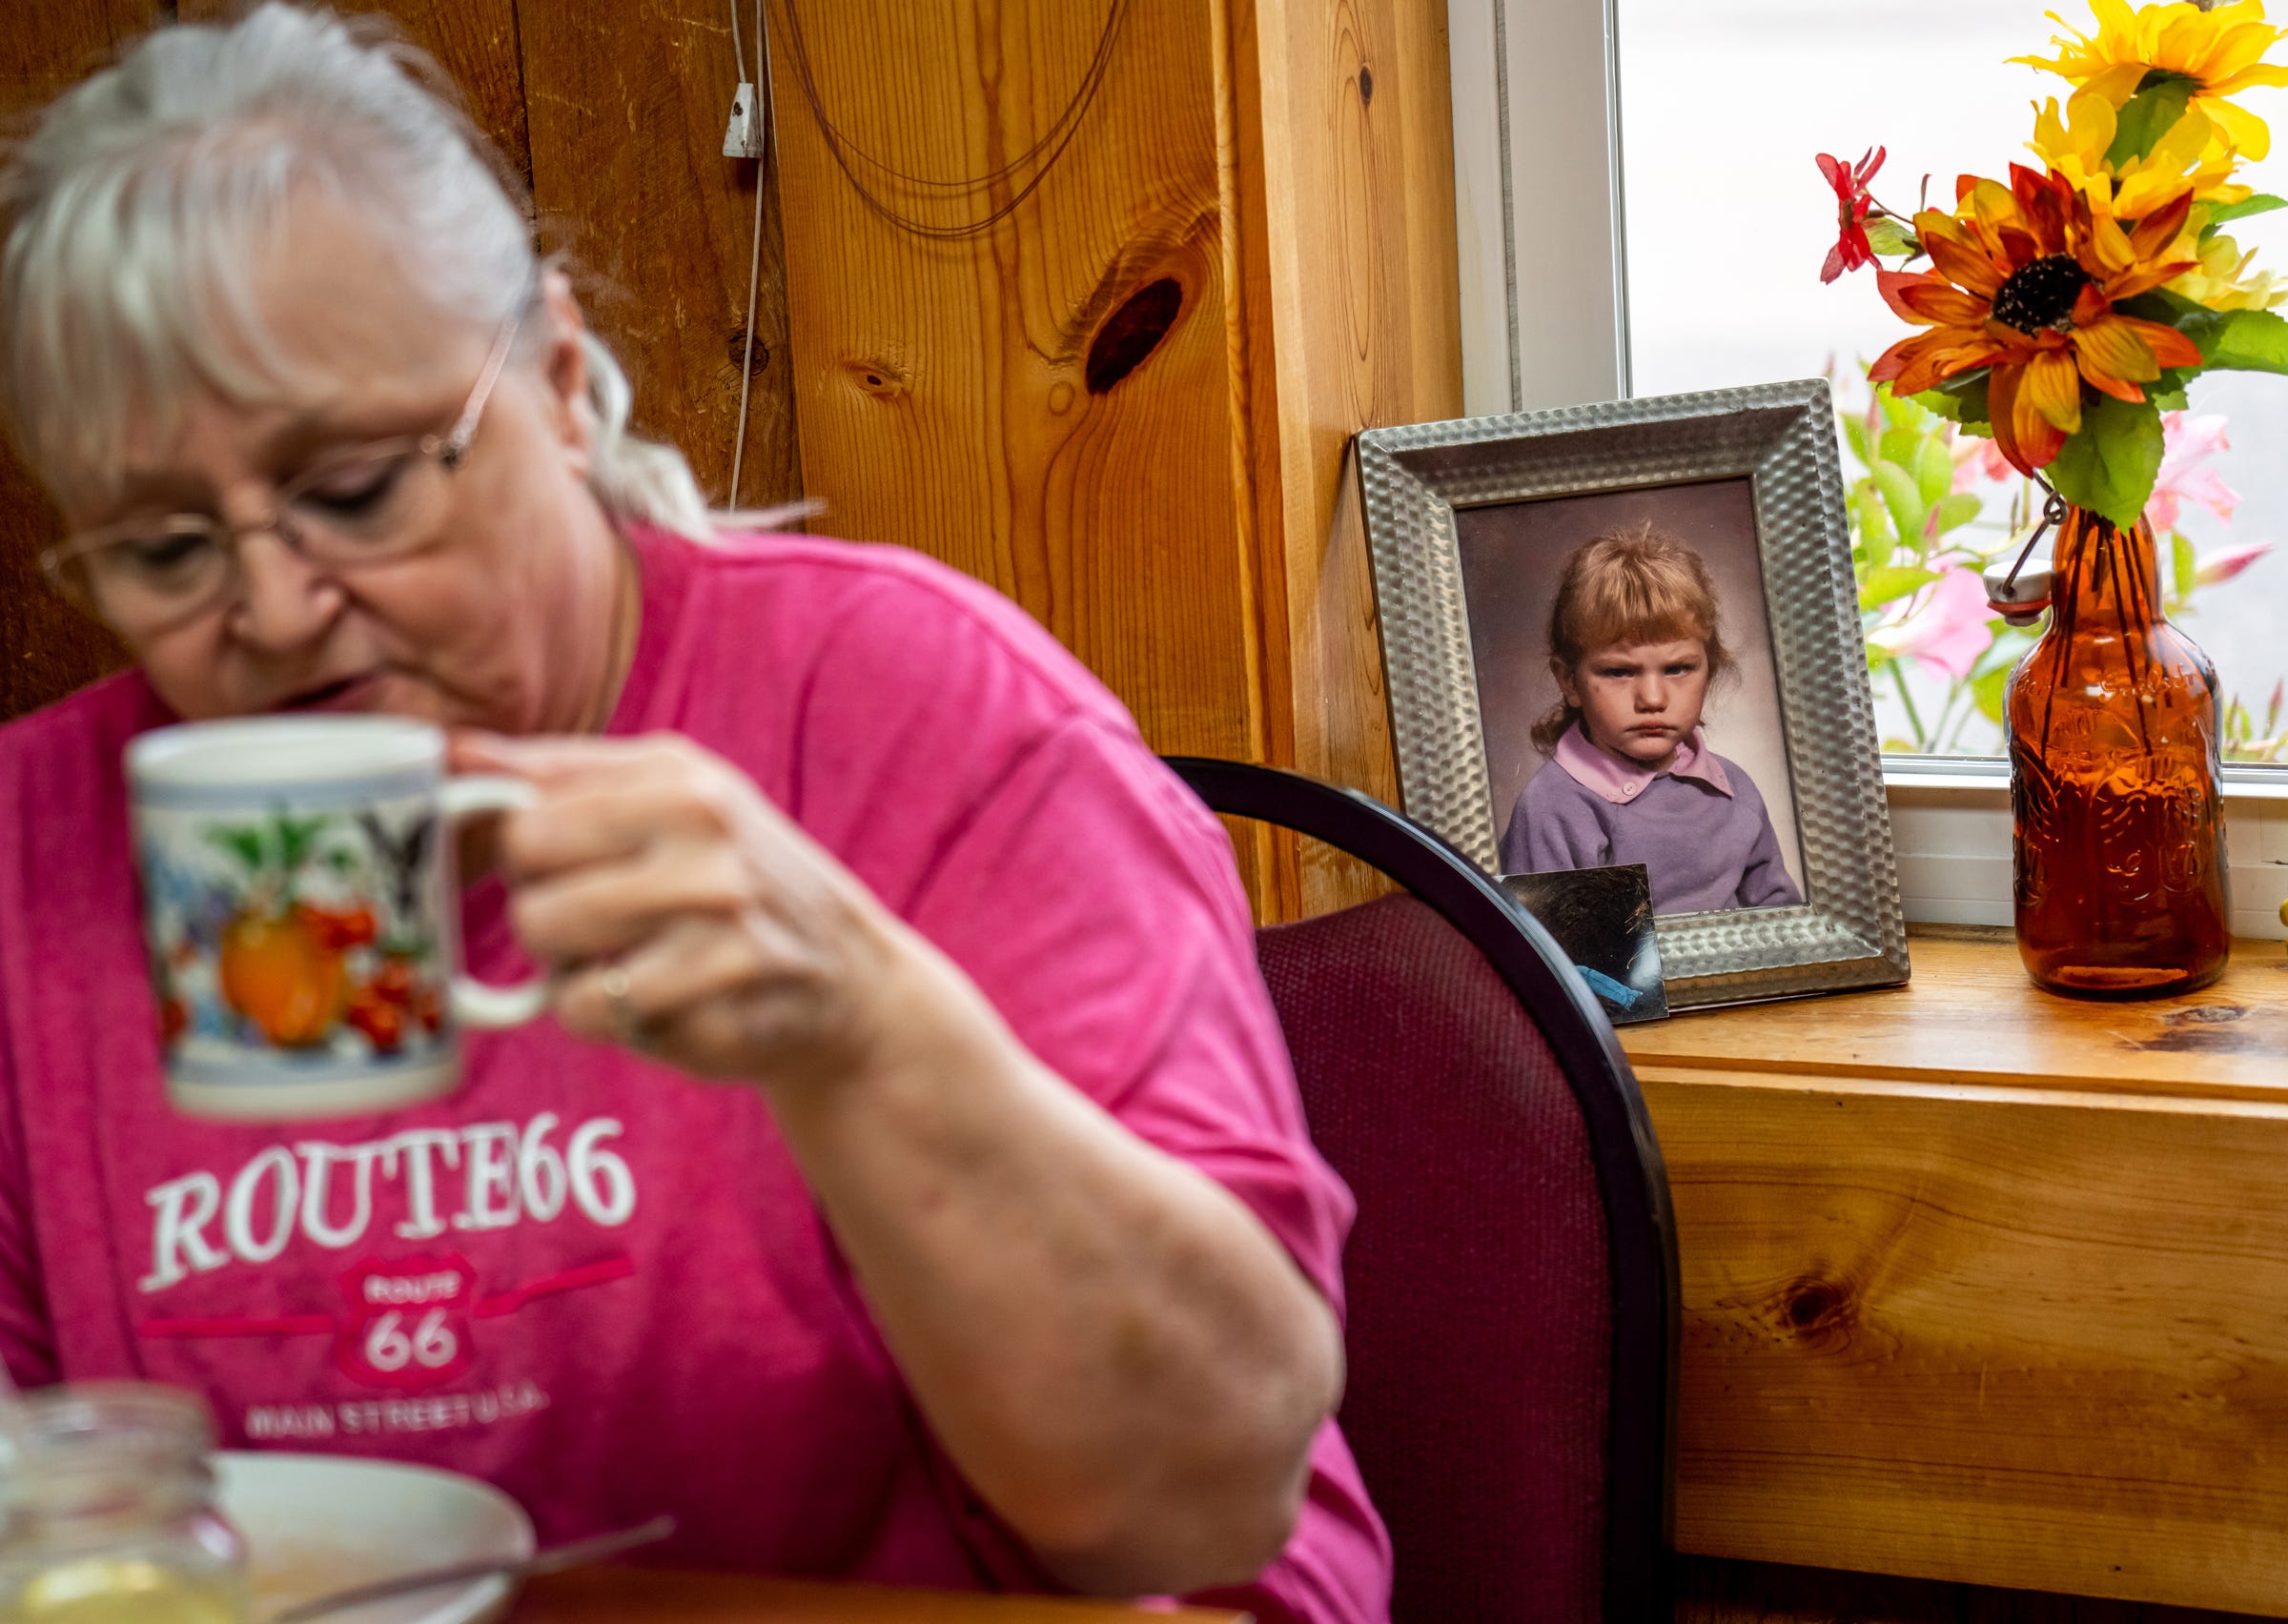 Jan Wehmeyer, of Gwinn, enjoys her breakfast next to an elementary school photo of Shannon's Home Cooking owner Shannon Greathouse when she was a troubled little girl, on display inside the family style restaurant in Gwinn on Wednesday, Oct. 20, 2021.